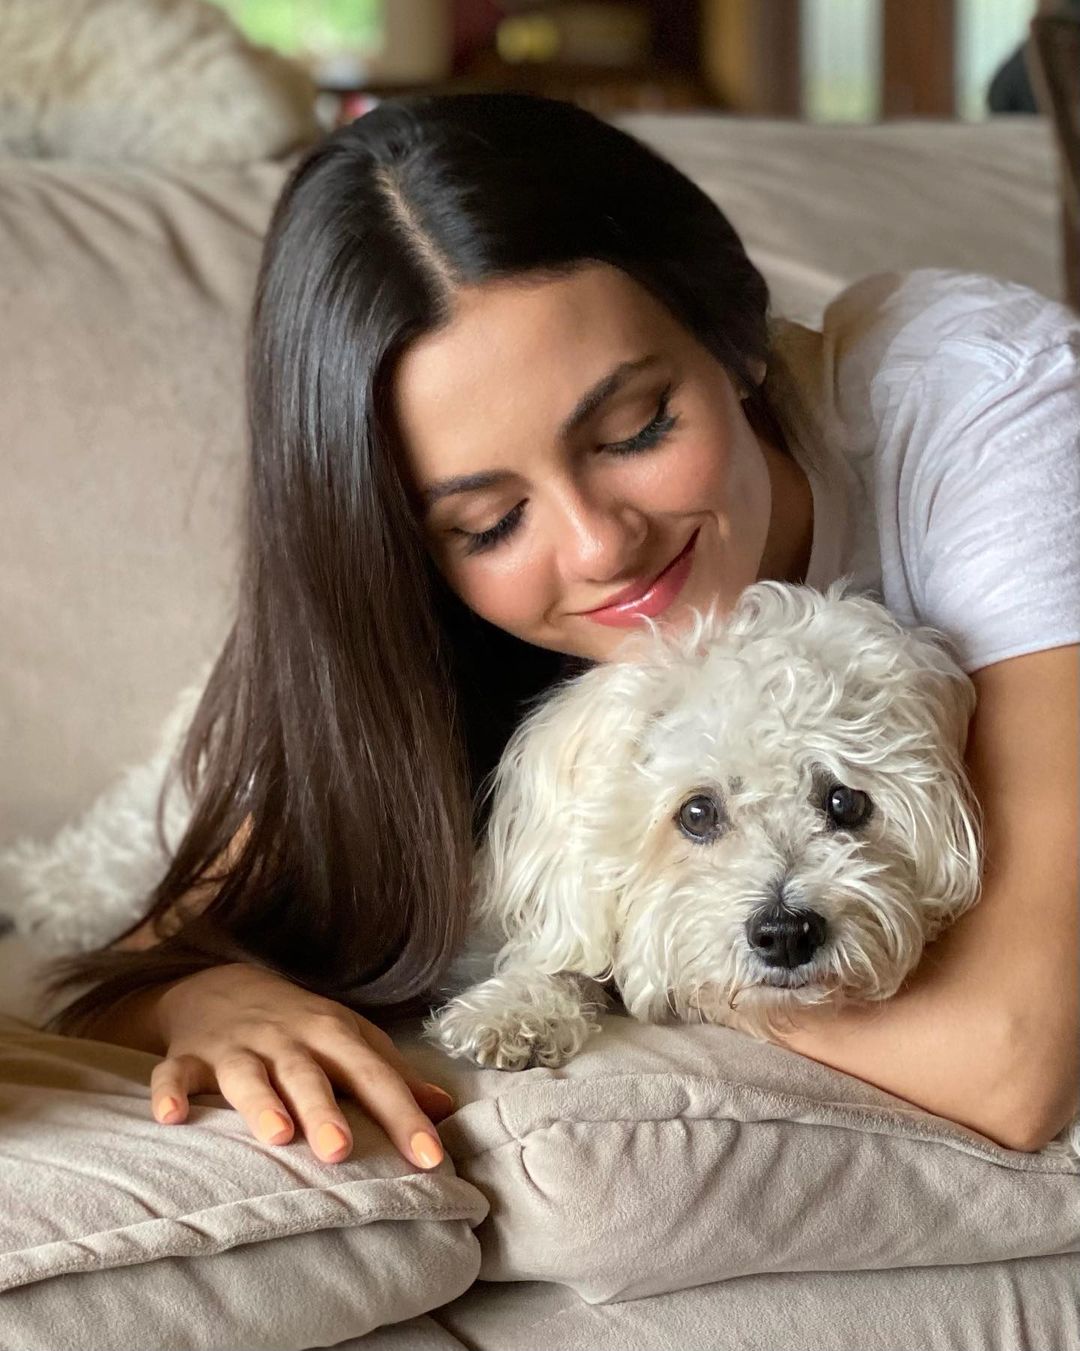 Victoria Justice shares heartbreaking news about her dog's tragic death